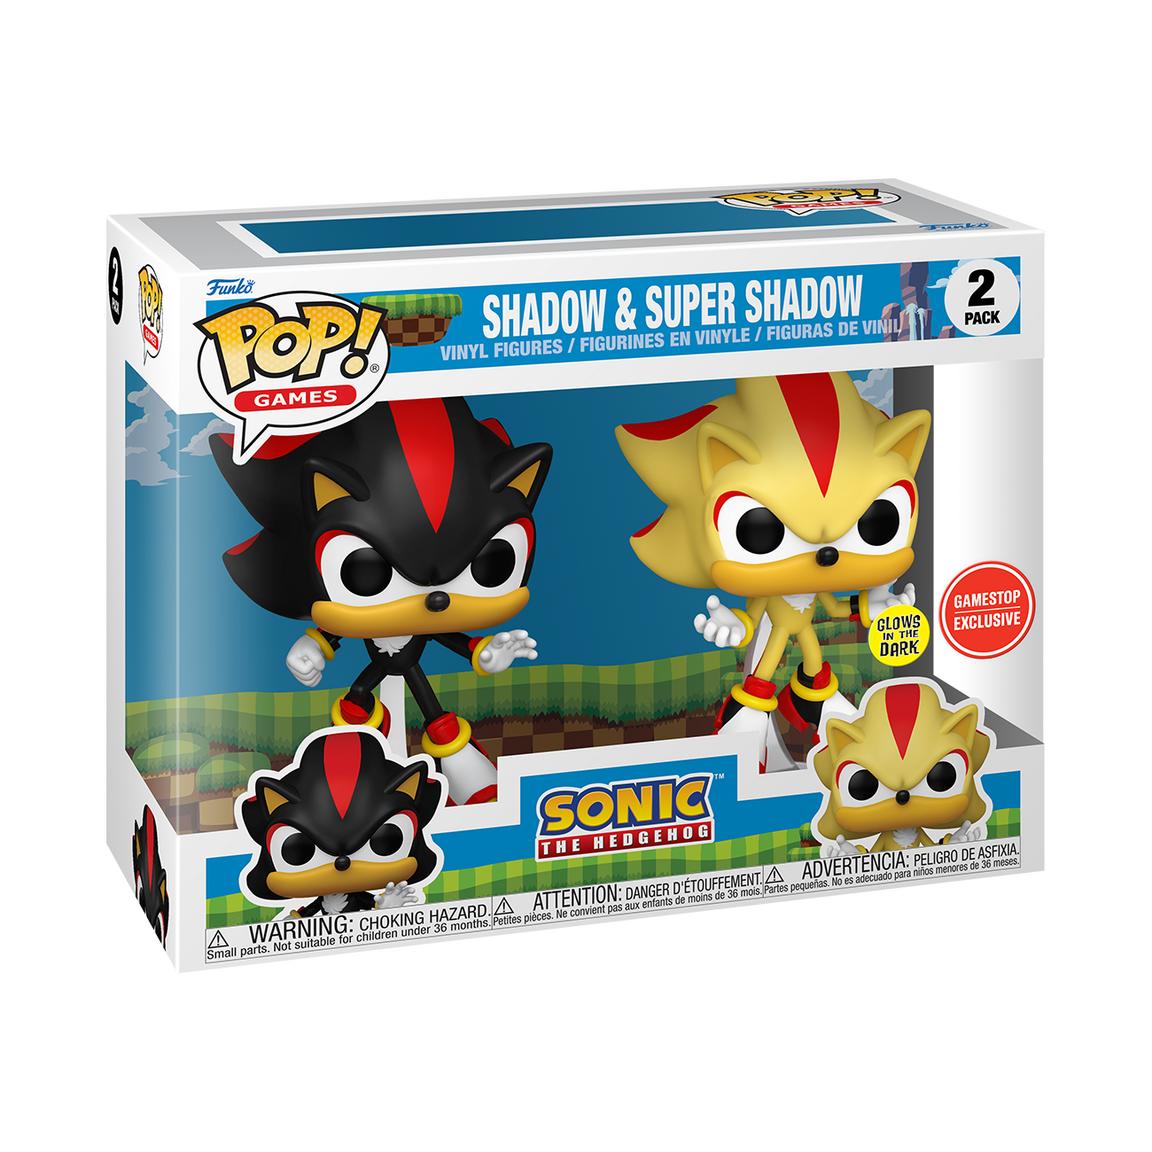 Funko POP! Games: Sonic the Hedgehog - Shadow & Super Shadow 2 Pack Exclusive